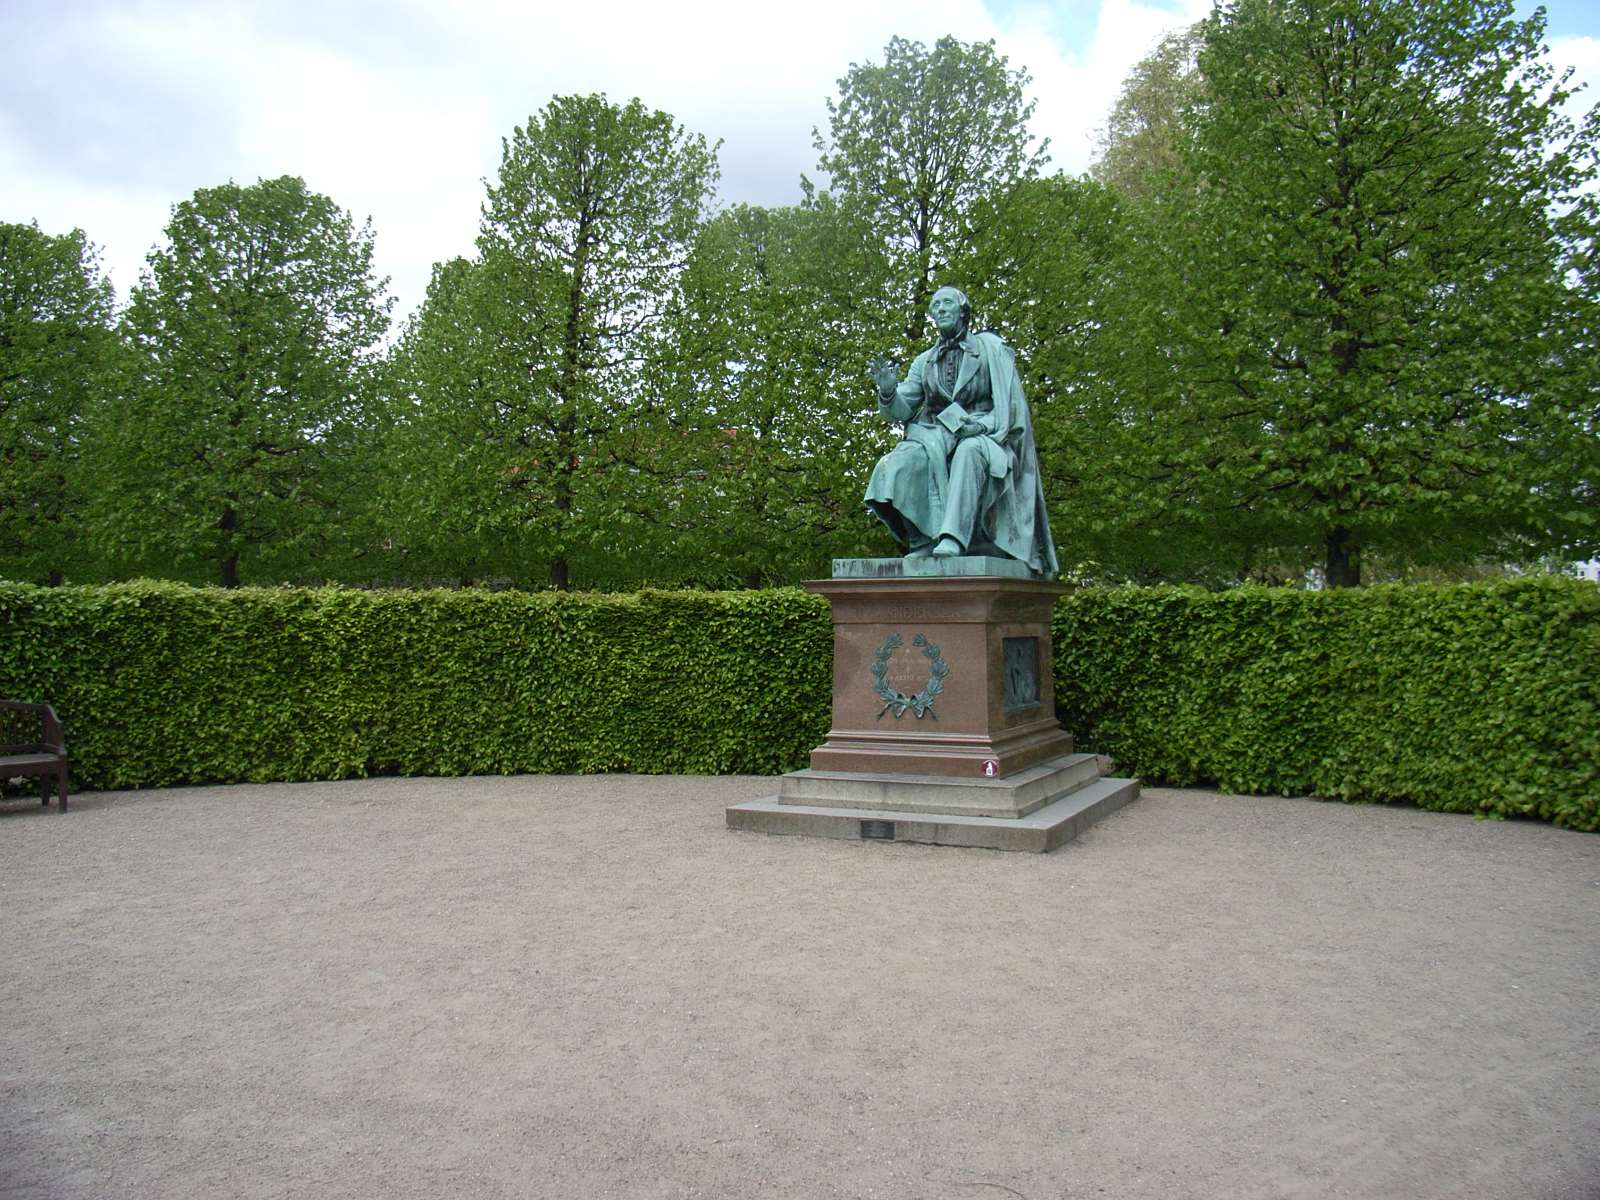 10-surprising-facts-about-the-hans-christian-andersen-statue